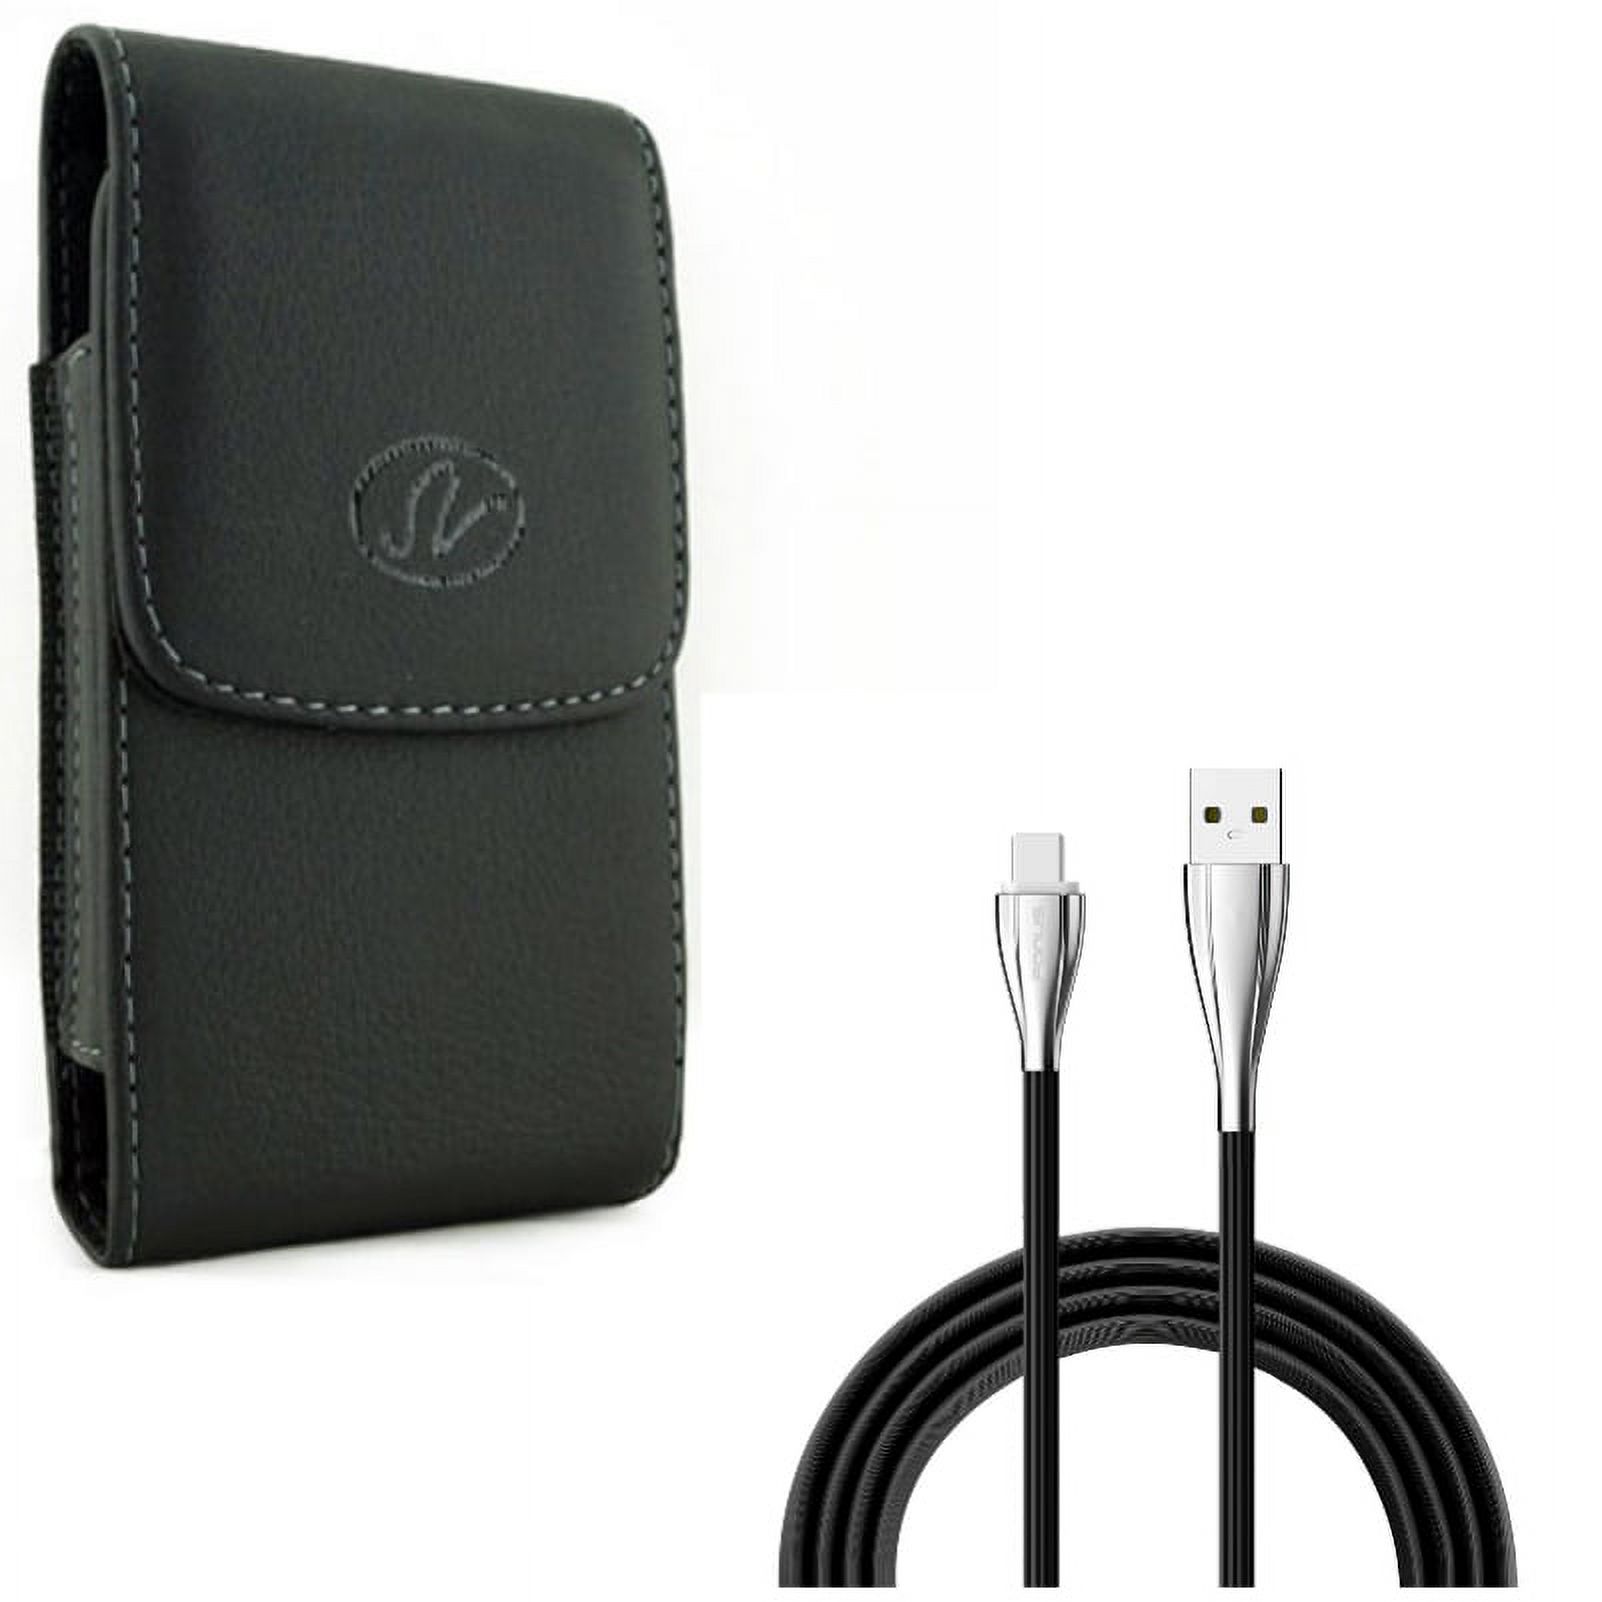 Black Leather Case Cover Pouch w Type-C USB Cable Charge Power Sync Cord 10ft USB-C Wire J6M for Acer Liquid Jade Primo - Alcatel Idol 4S - ASUS ROG Phone, ZenFone AR 6 5z 4 Pro - image 1 of 10